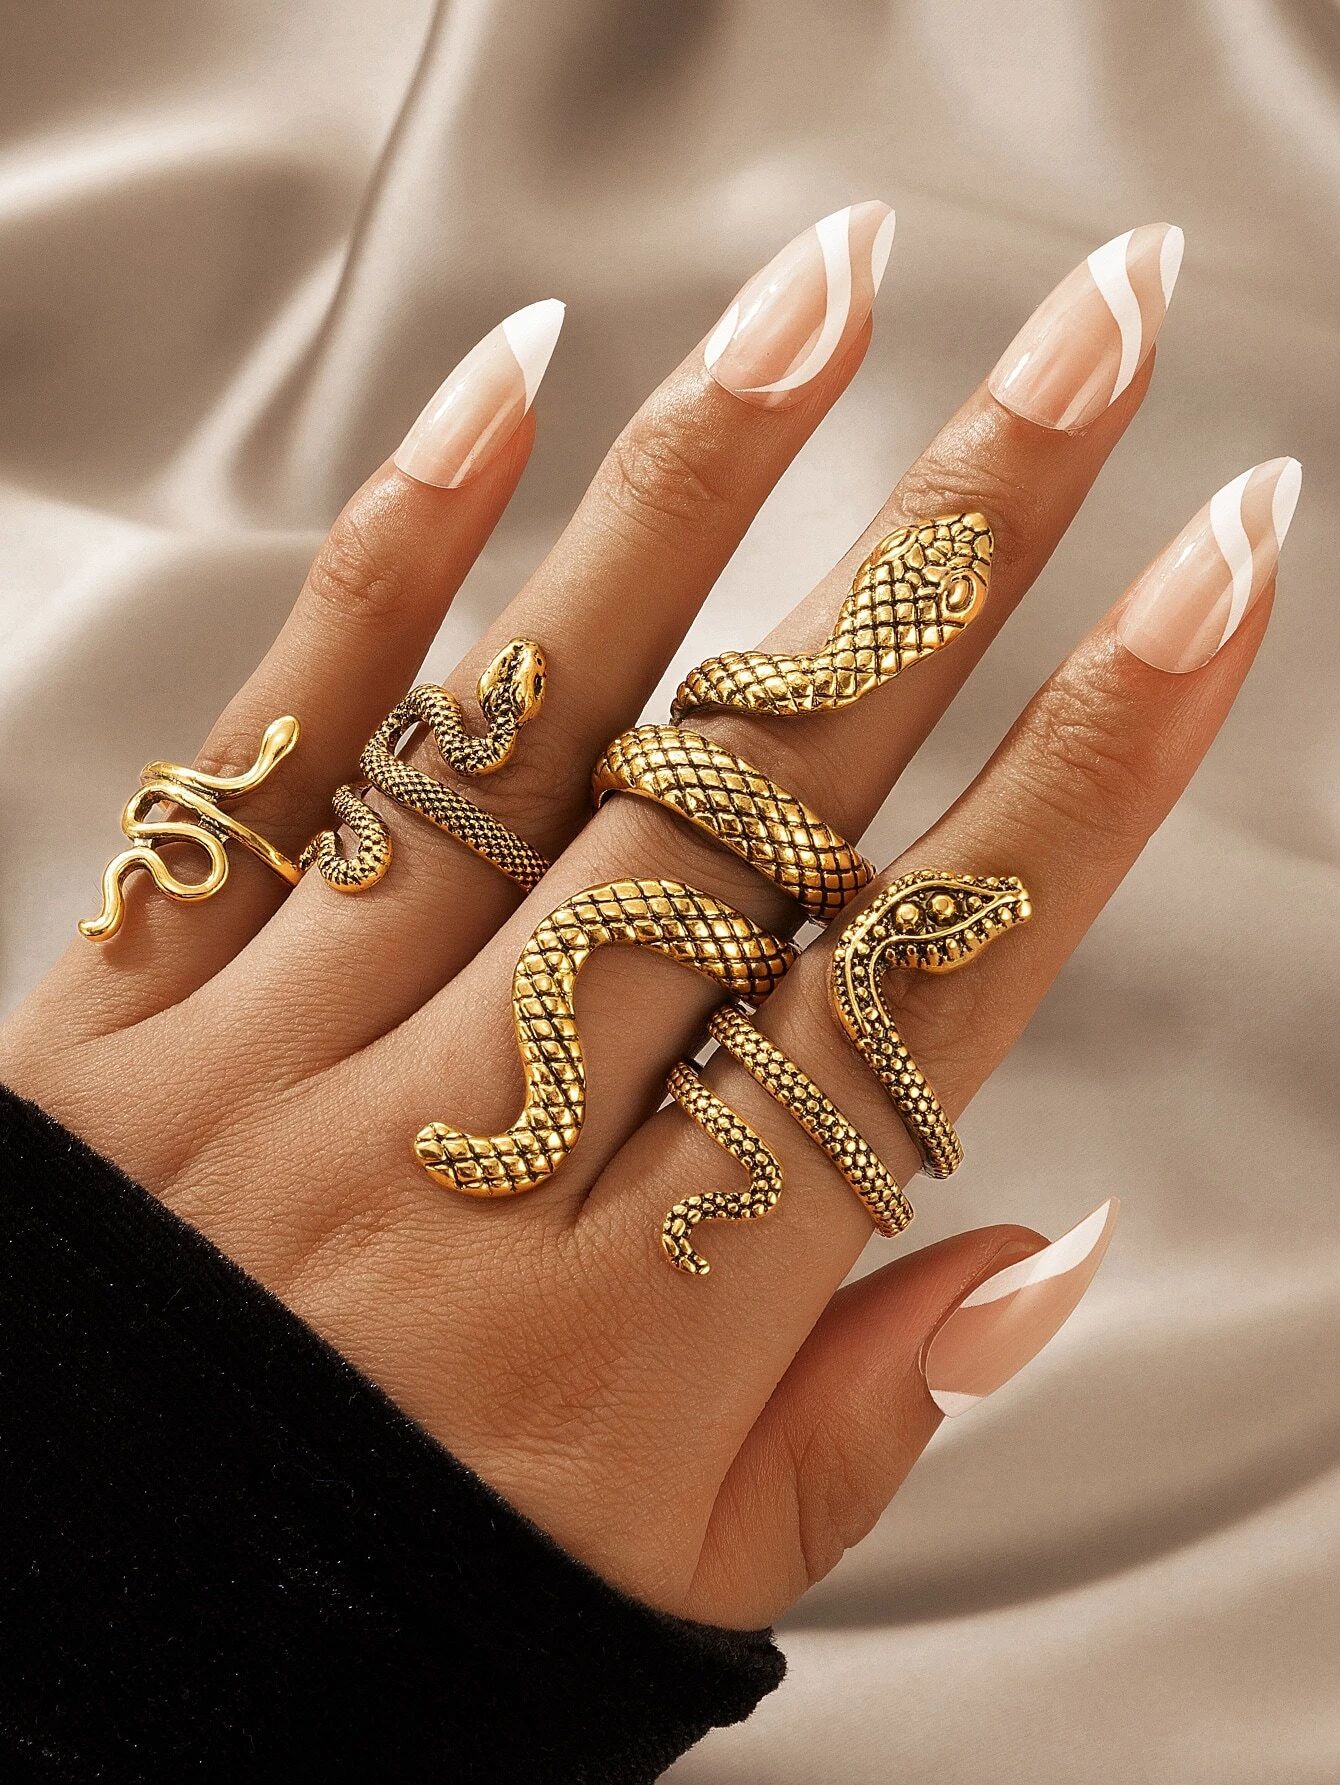 4pcs Snake Design Wrap Ring  SKU: sW210601132251503(1000+ Reviews)$1.90$1.81Join for an Exclusive... | SHEIN